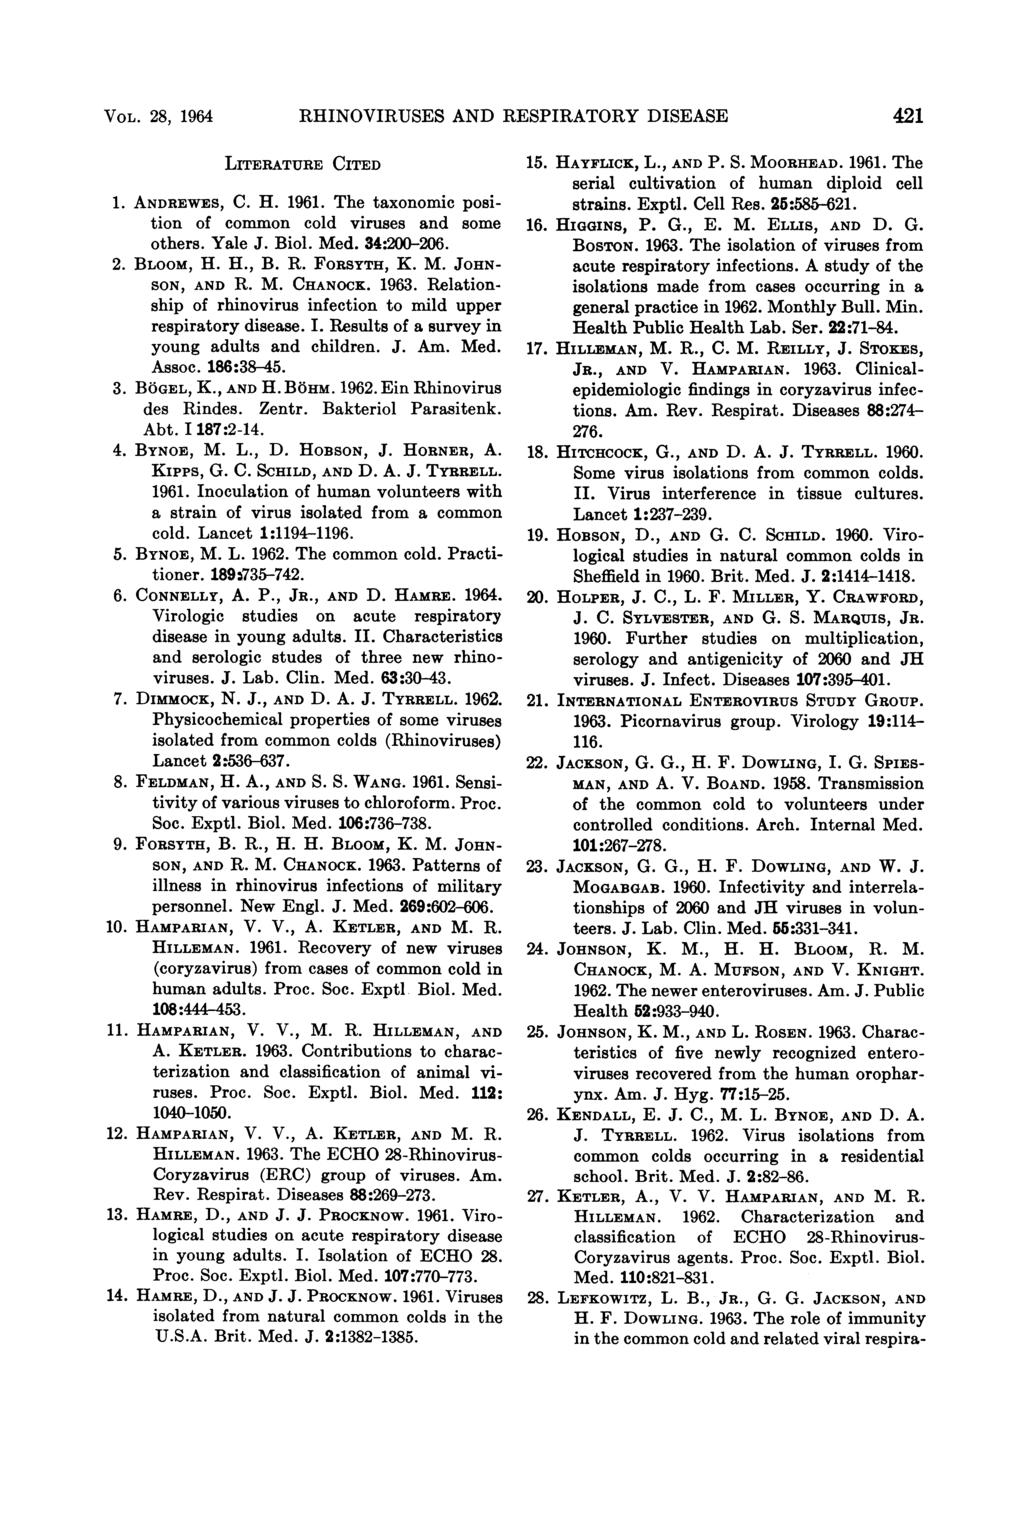 VOL. 28, 1964 RHINOVIRUSES AND R] ESPIRATORY DISEASE 421 LITERATURE CITED 1. ANDREWES, C. H. 1961. The taxonomic position of common cold viruses and some others. Yale J. Biol. Med. 34:200-206. 2. BLOOM, H.